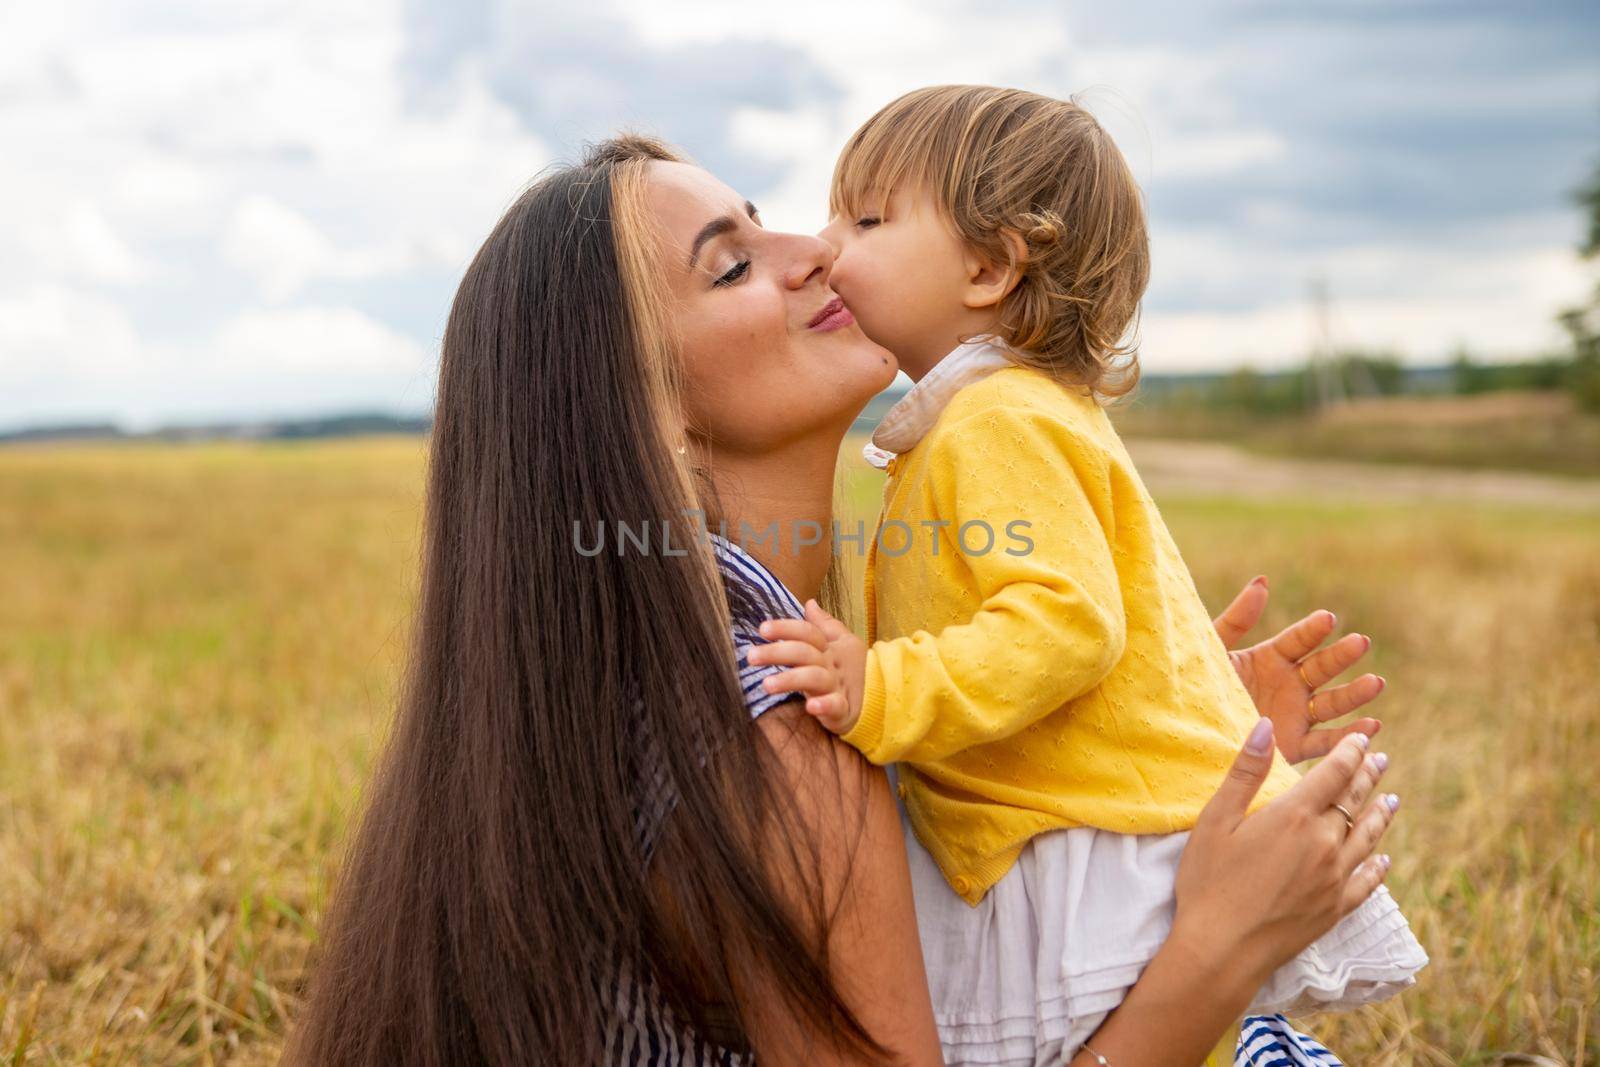 adorable toddler girl kisses her mother on a picnic in the field.